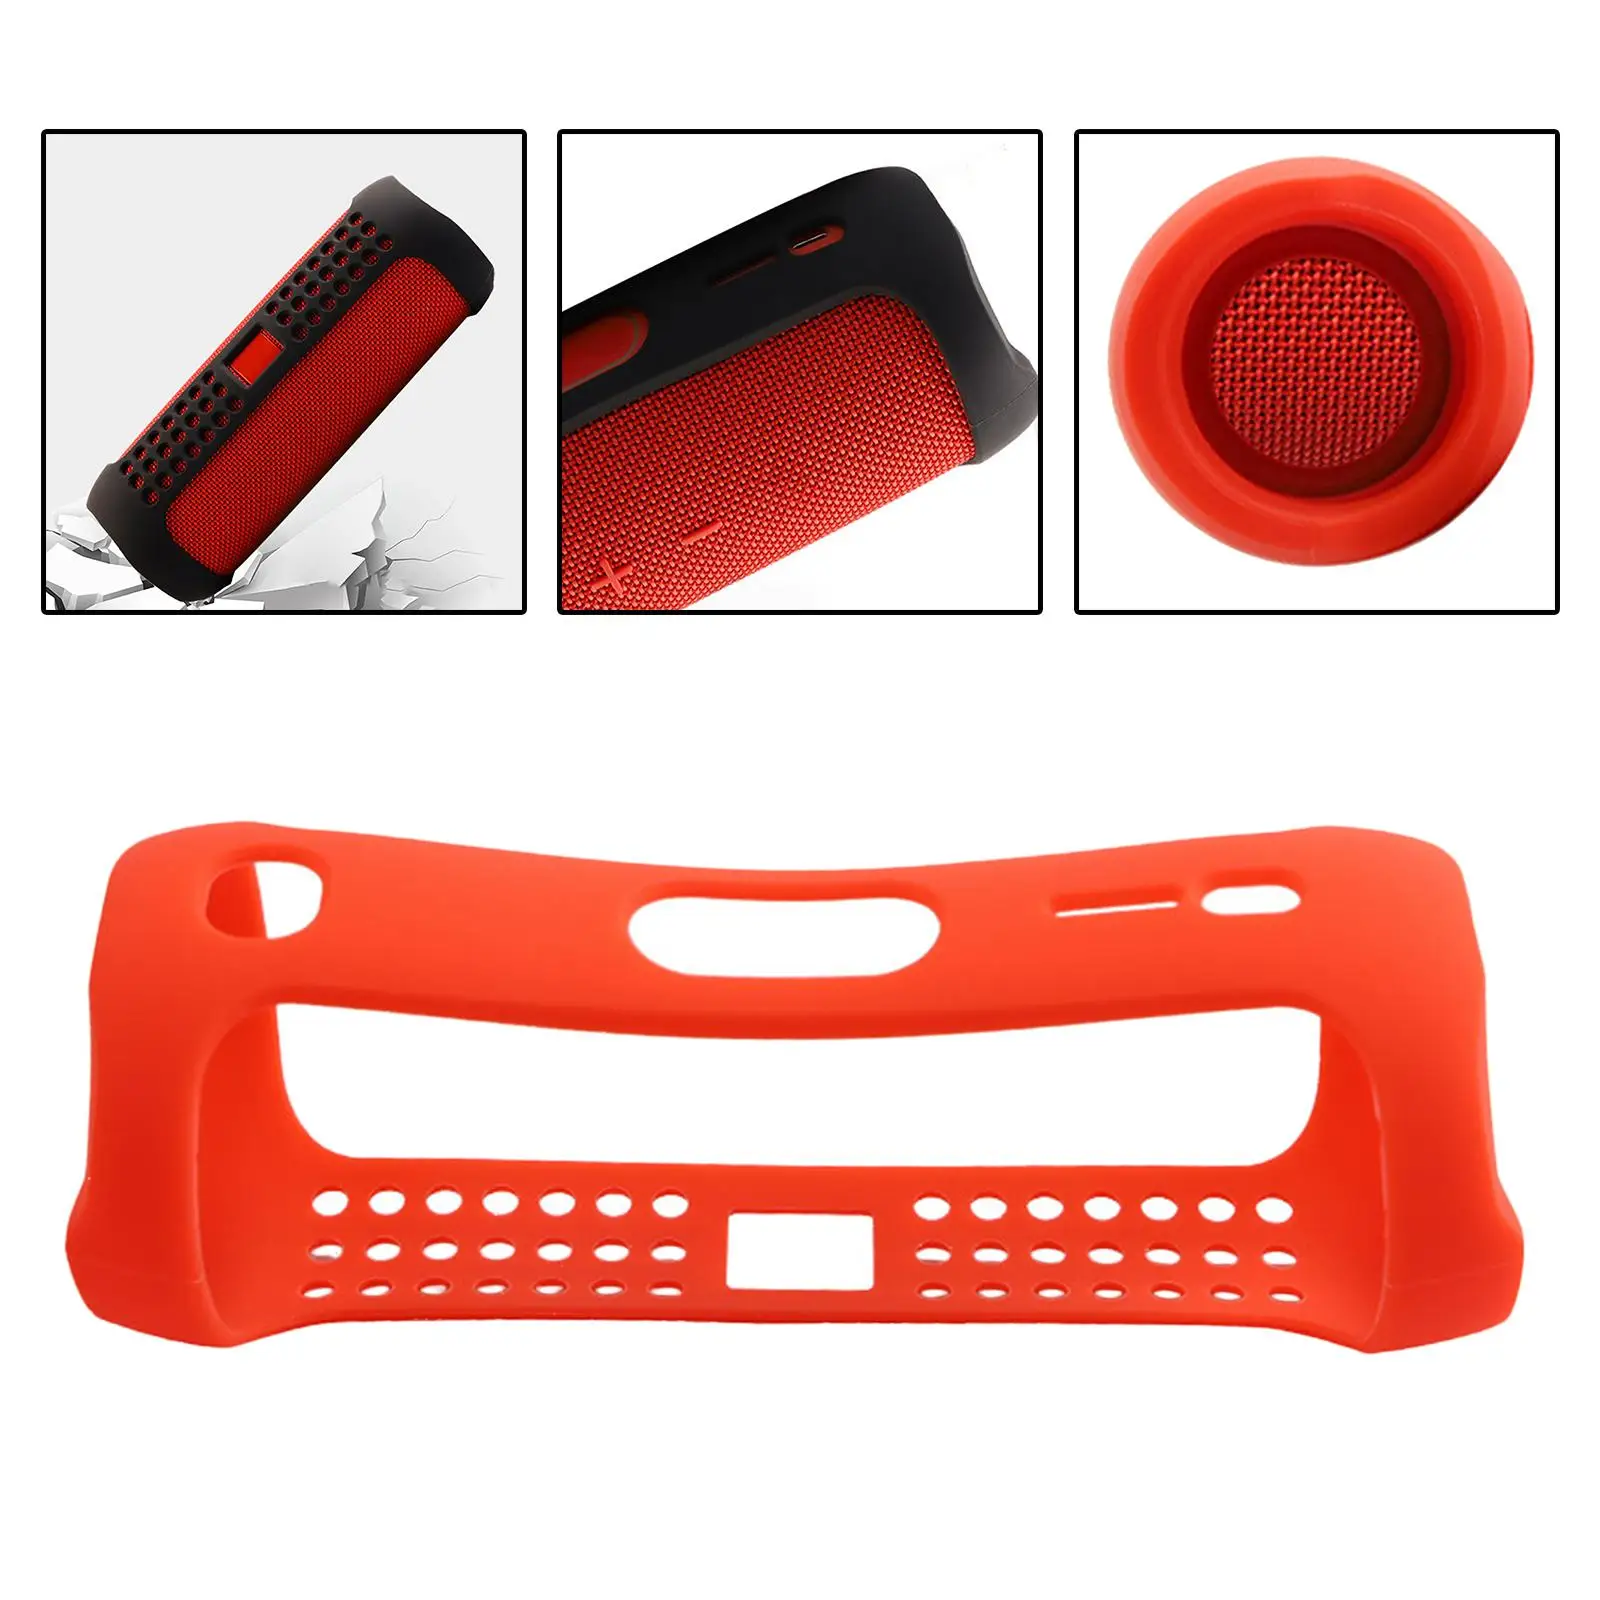 Silicone Speaker Cases Cover Portable Soft Protective Case for J-B-L Flip 5 Wireless Bluetooth Speaker